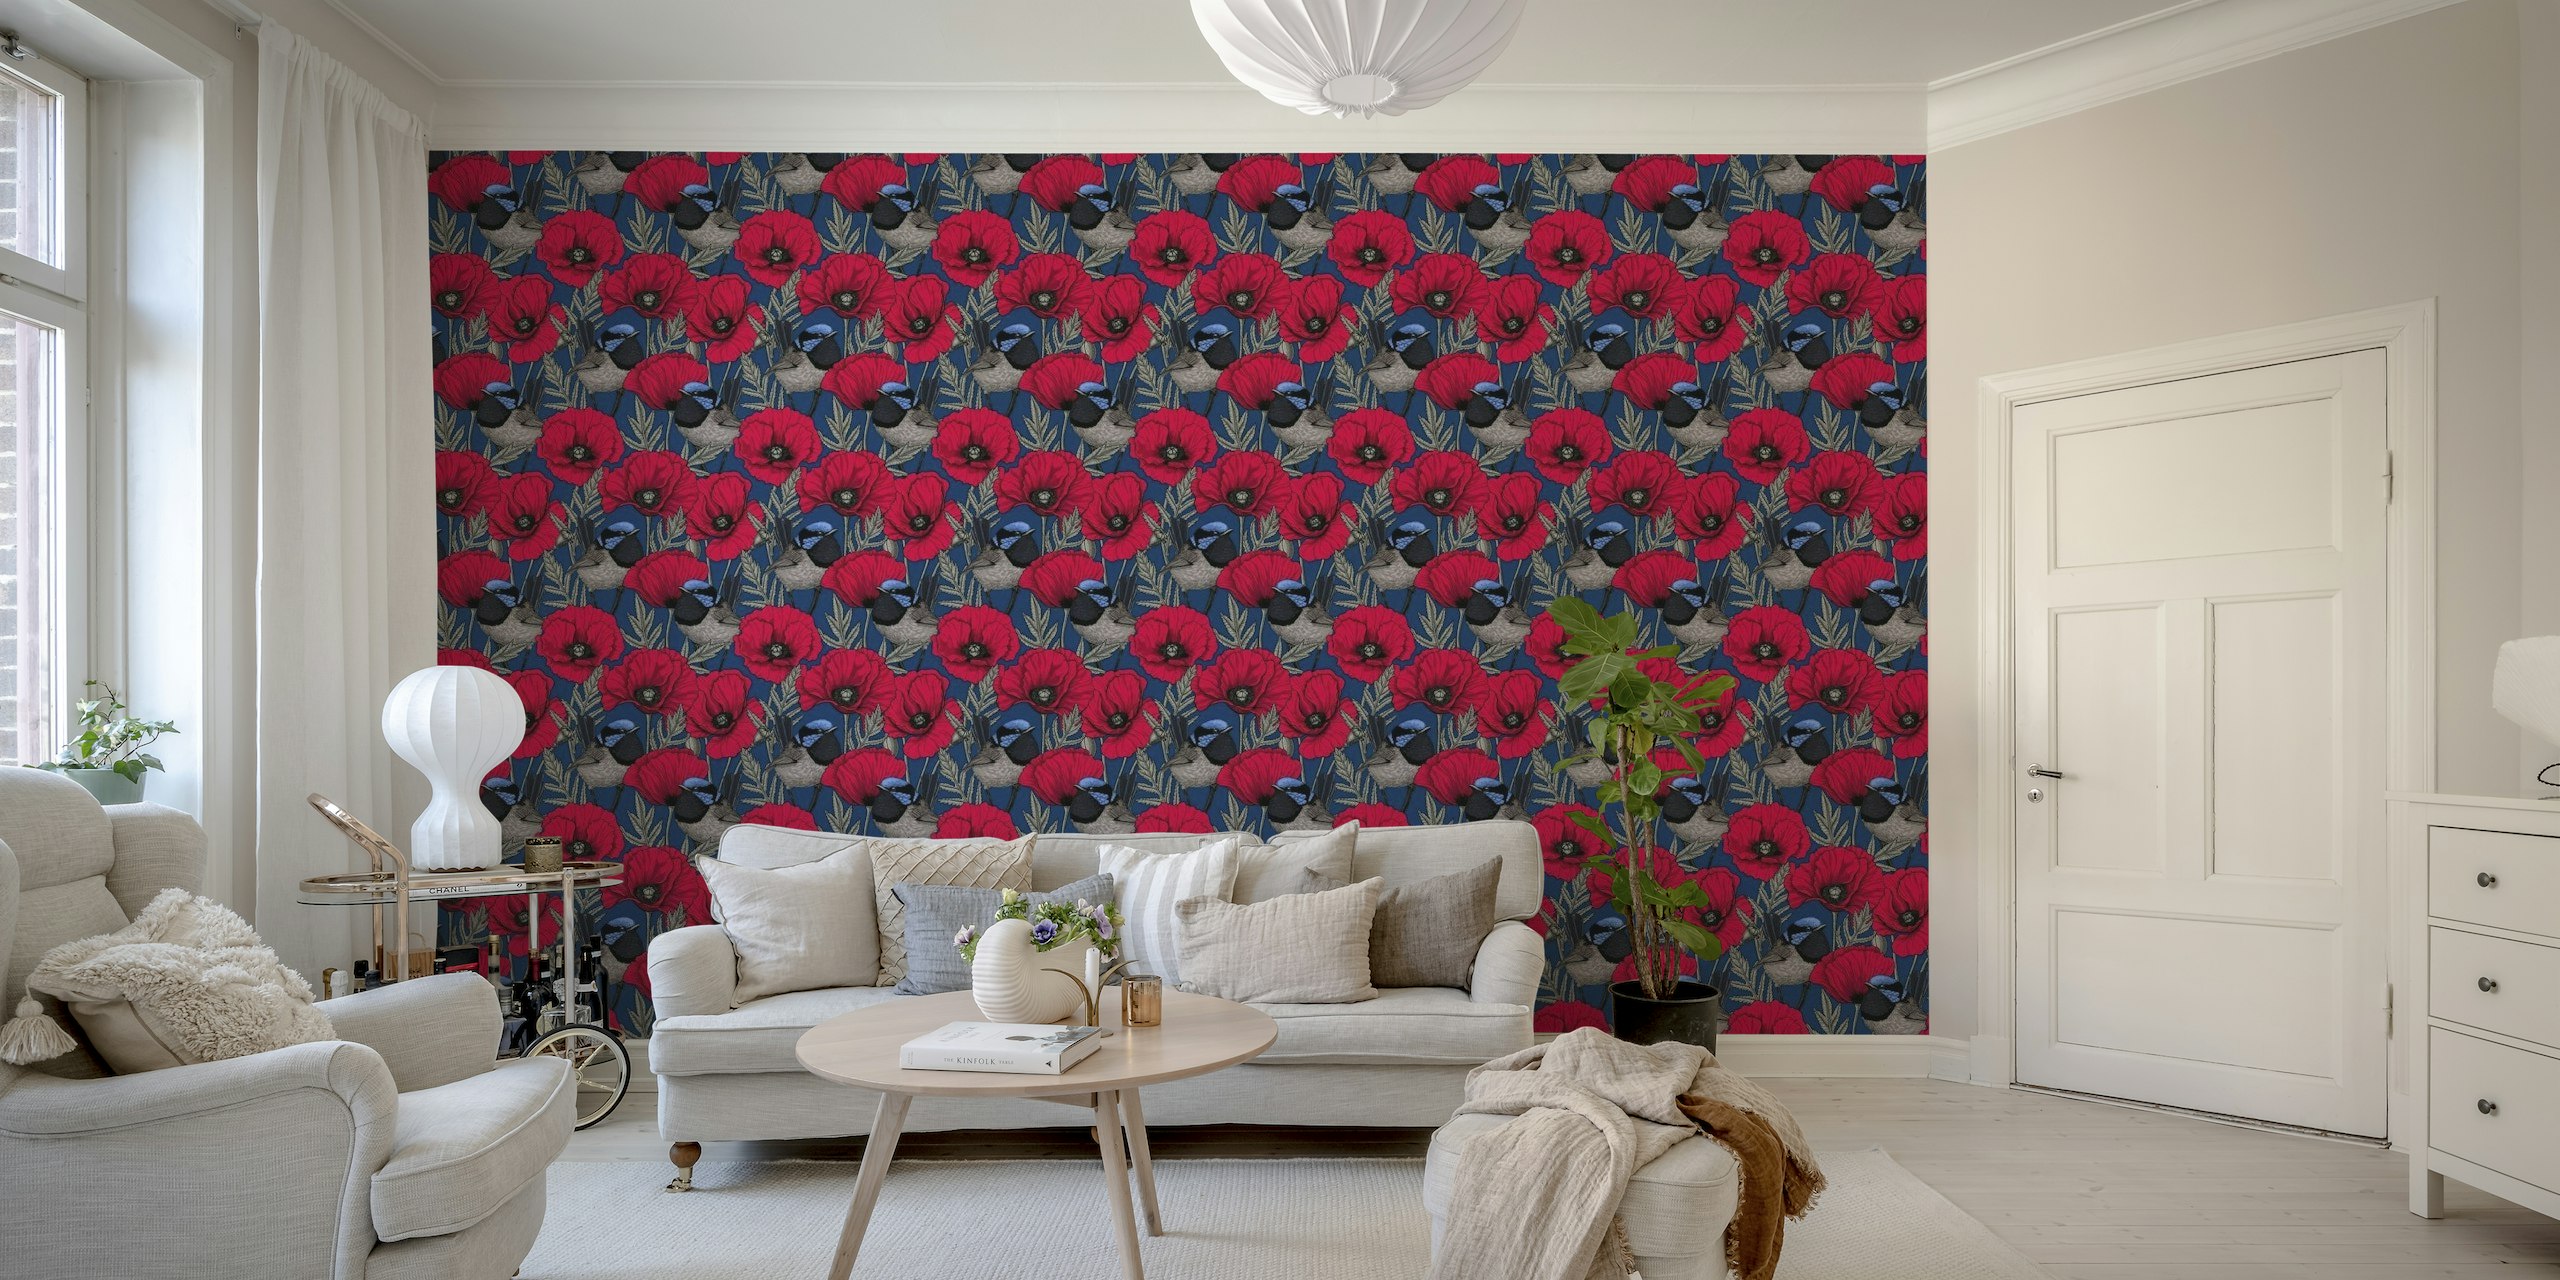 Fairy wrens and red poppies on dark blue behang